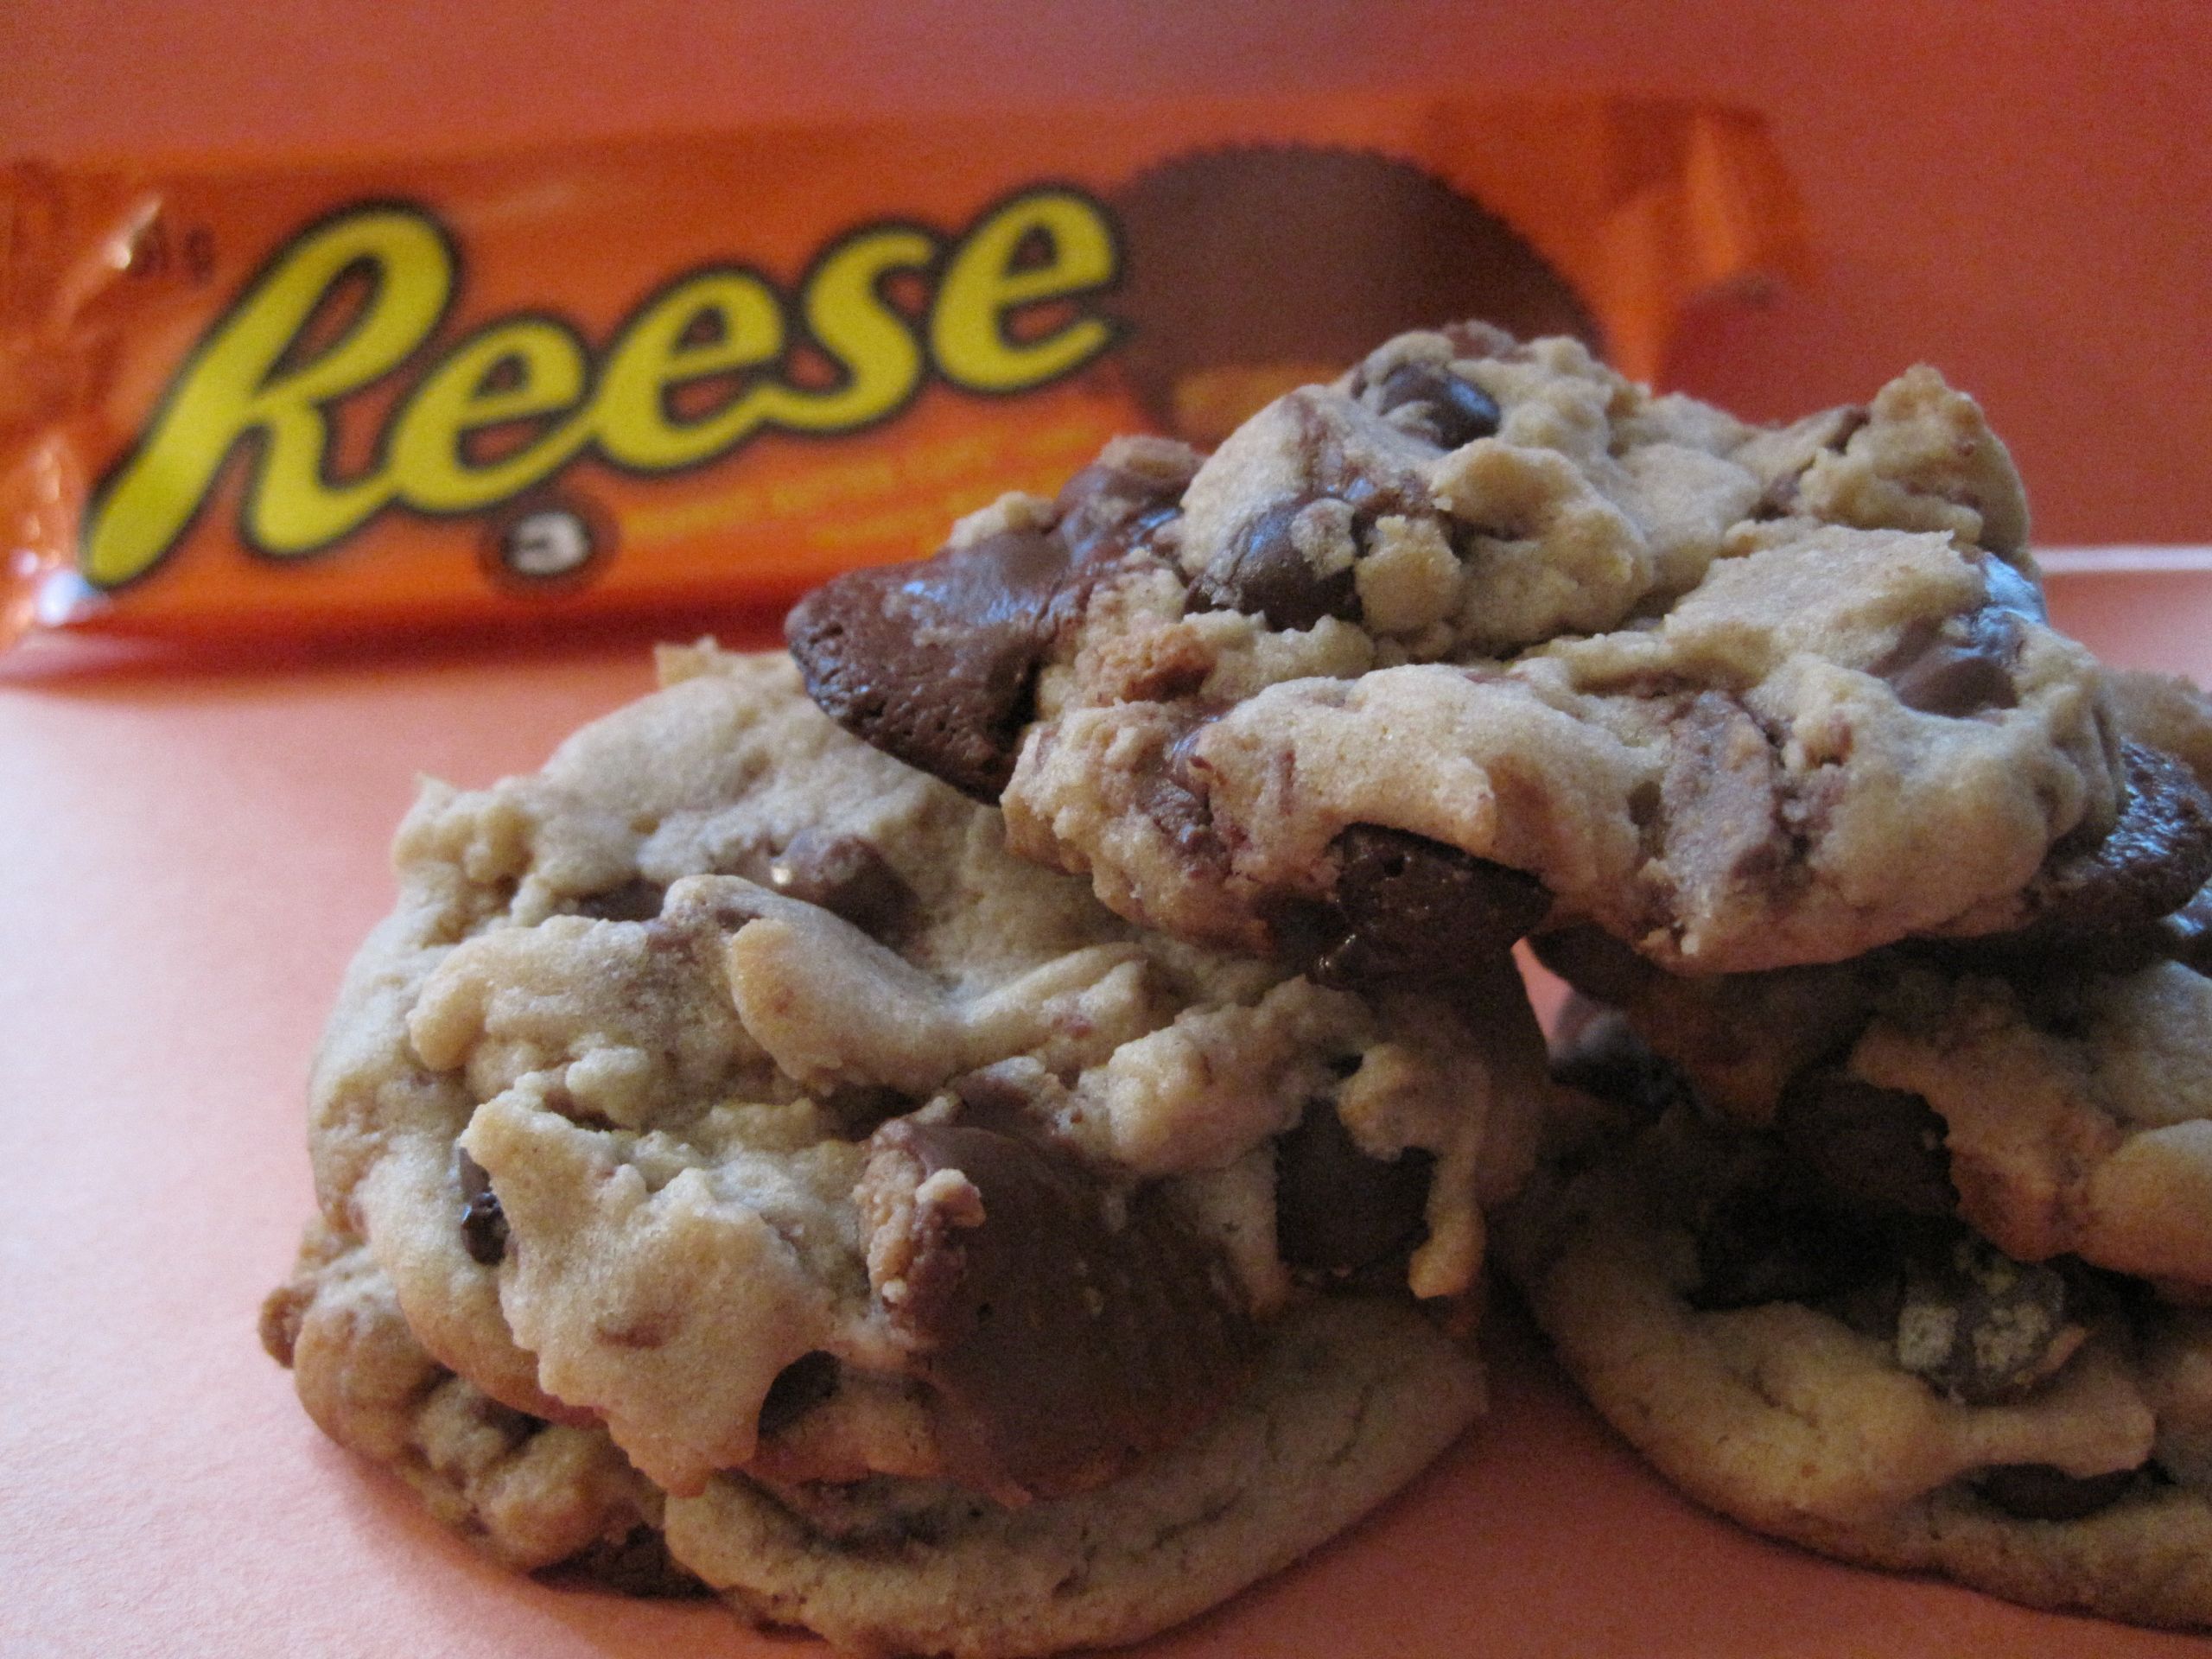 Reese Peanut Butter Cup Cookies Recipe
 Reese’s Peanut Butter Cup Cookies – Warm Vanilla Sugar